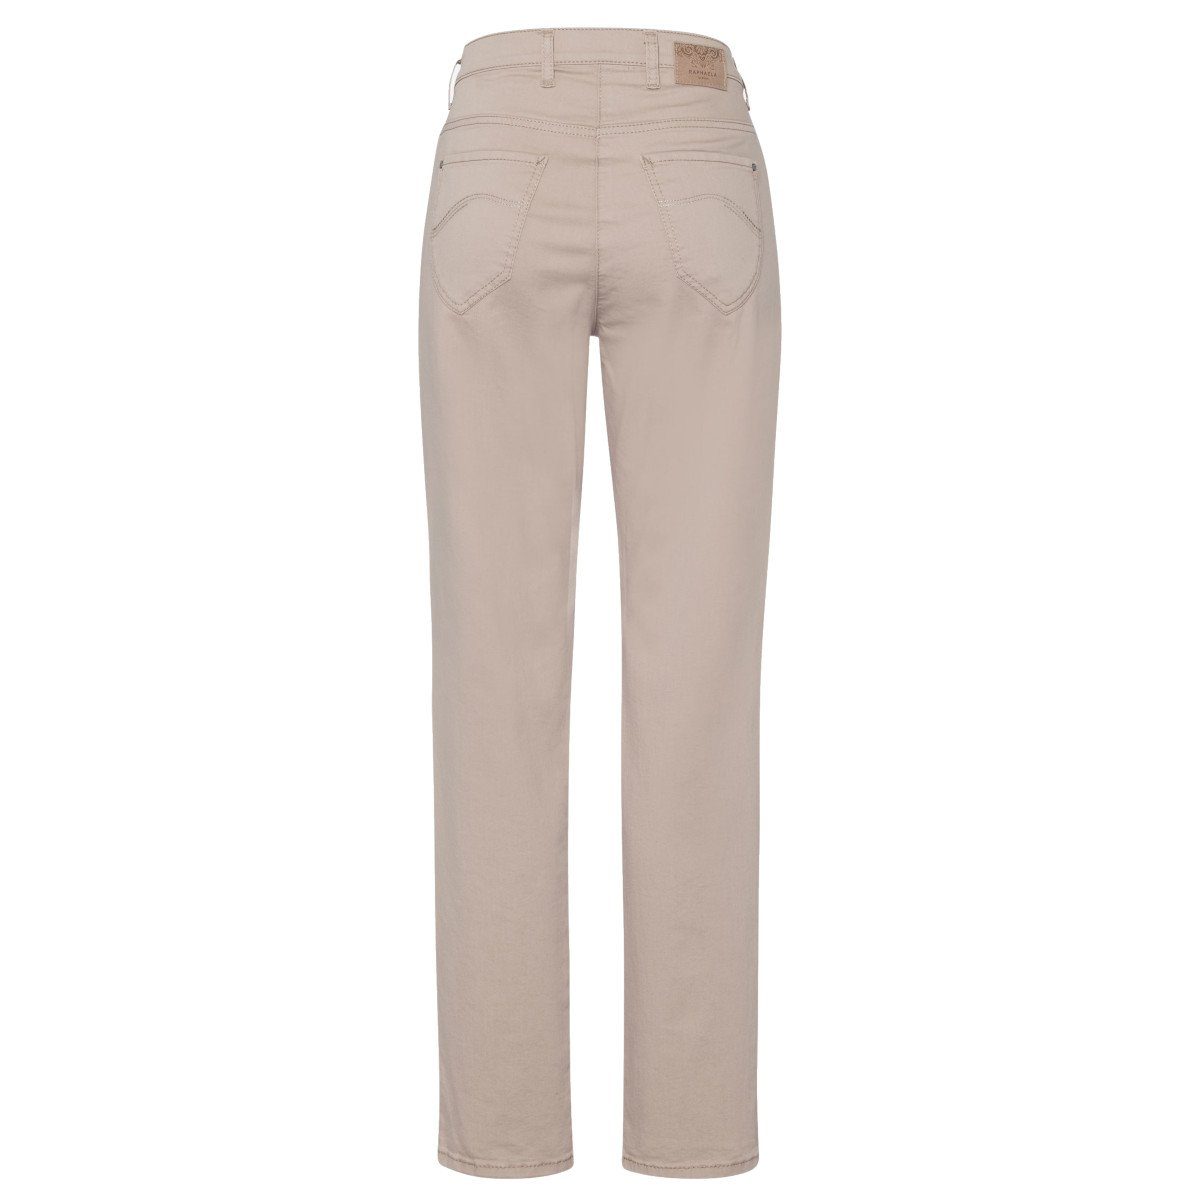 RAPHAELA by (55) light Corry Fay COMFORT Plus FIT BRAX Comfort 5-Pocket-Jeans taupe